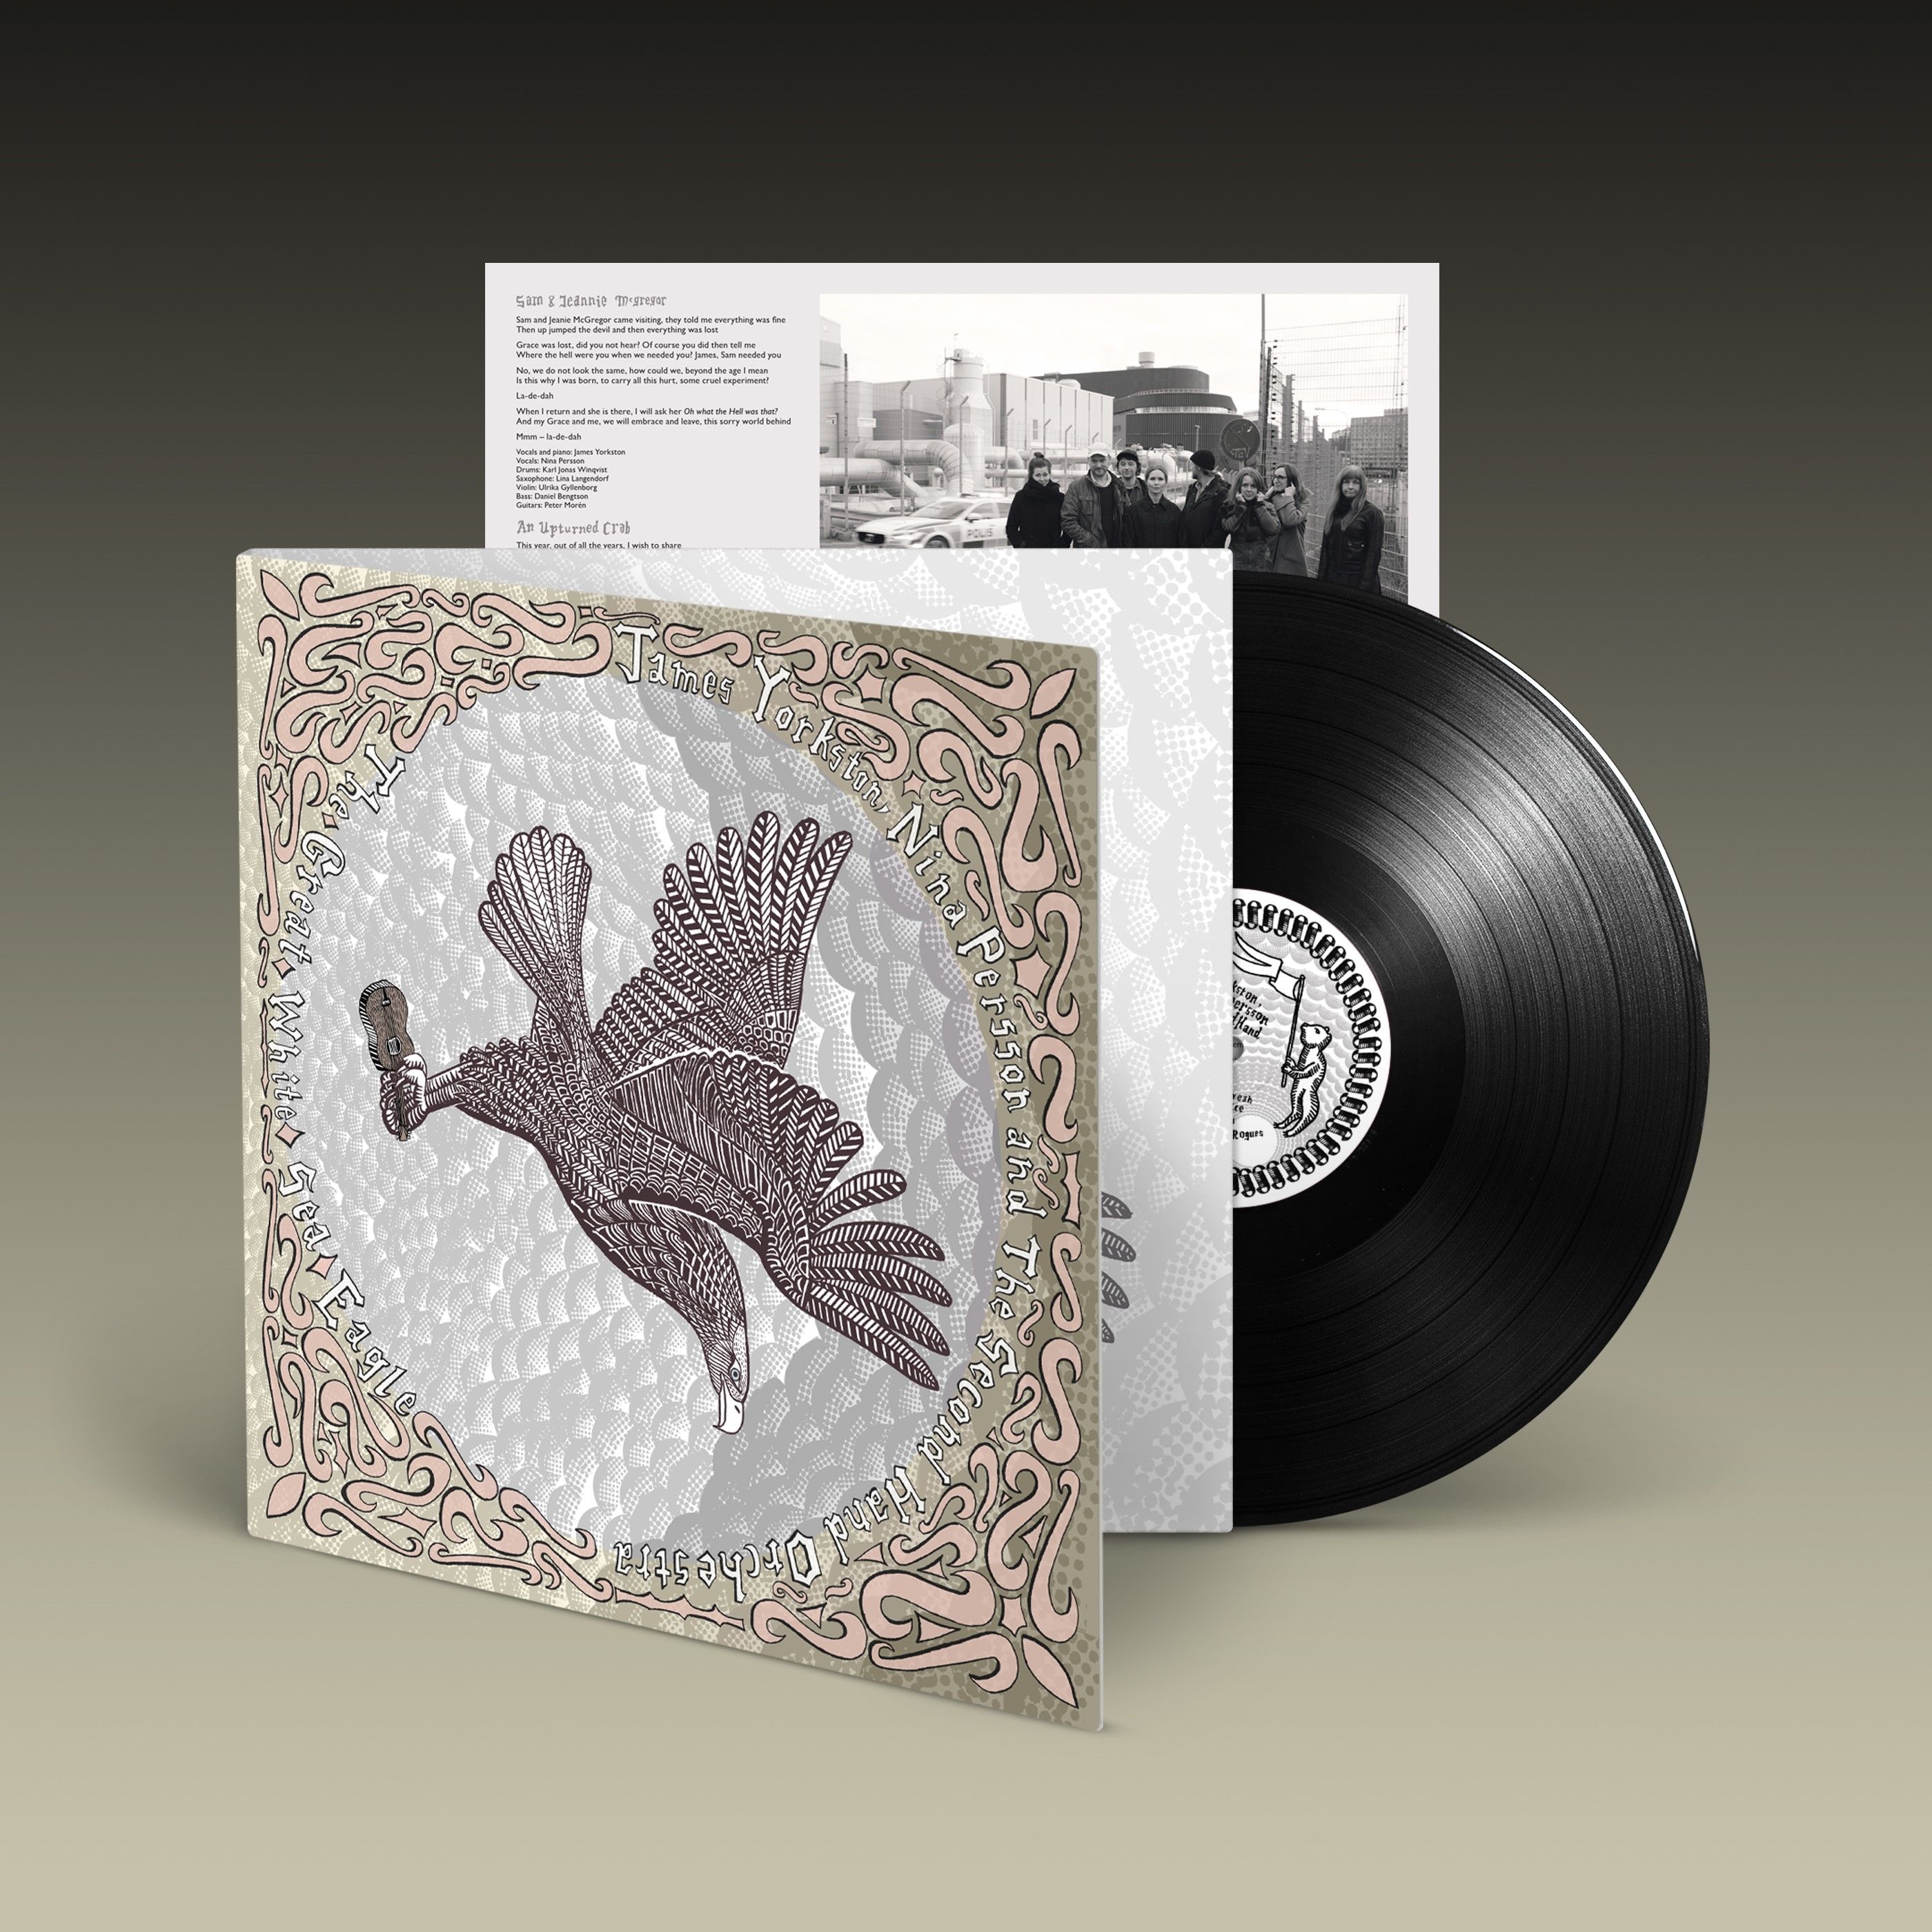 James Yorkston, Nina Persson, The Second Hand Orchestra - The Great White Sea Eagle: LP